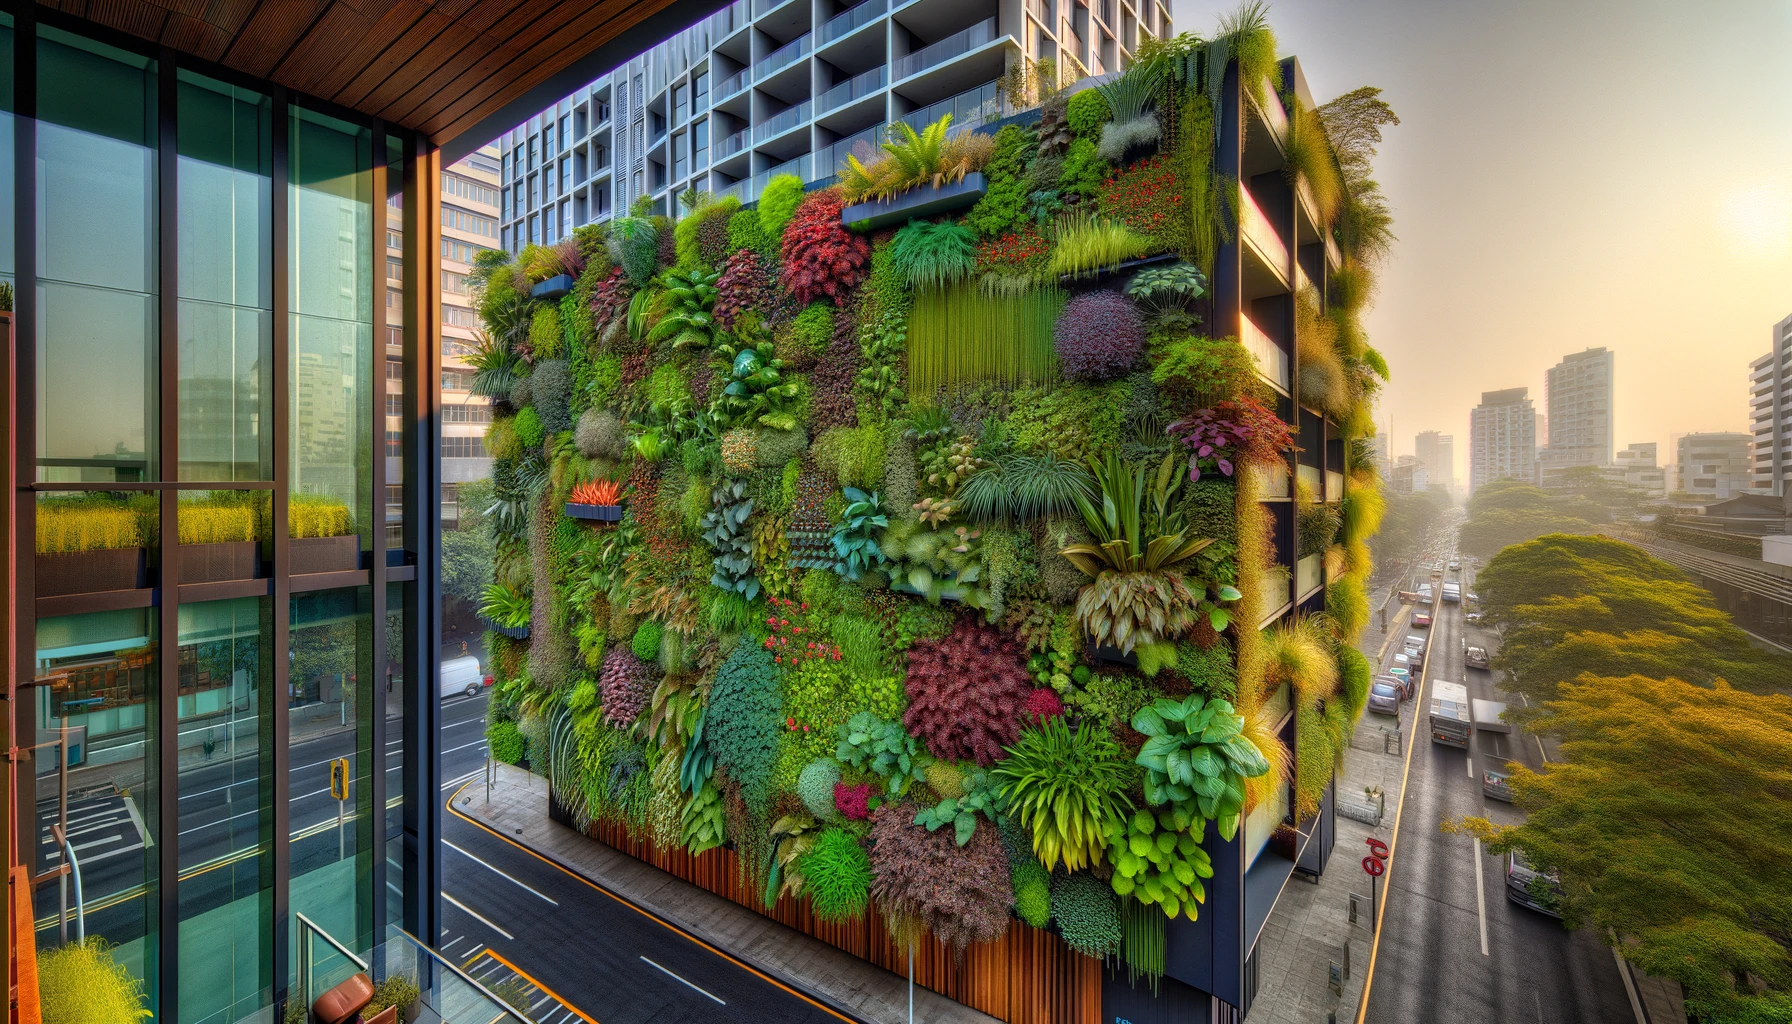 Urban building with lush vertical garden, cityscape background.